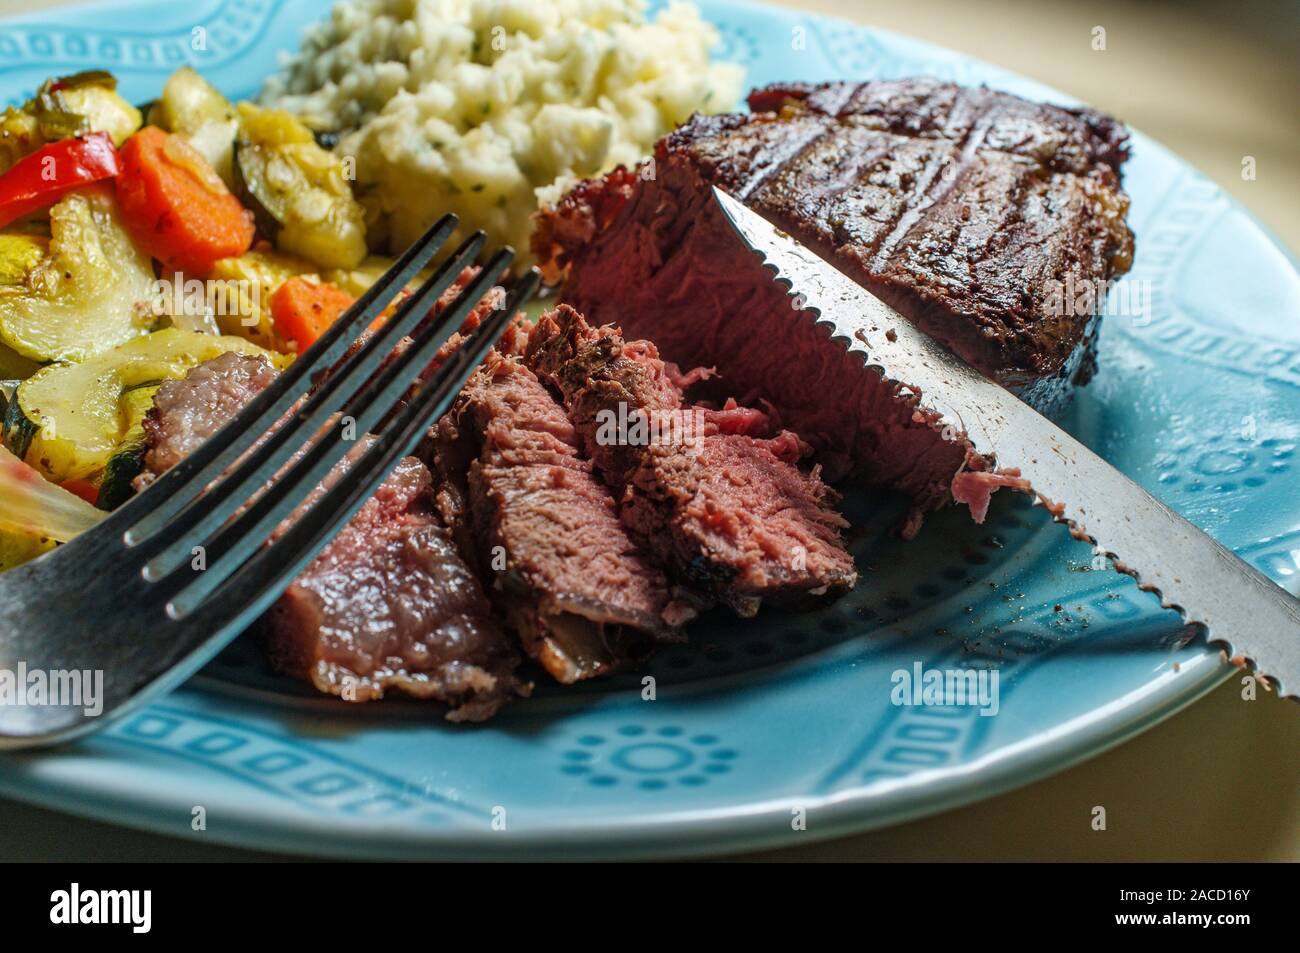 Filet mignon steak dinner with mashed potatoes and grilled vegetables Stock Photo